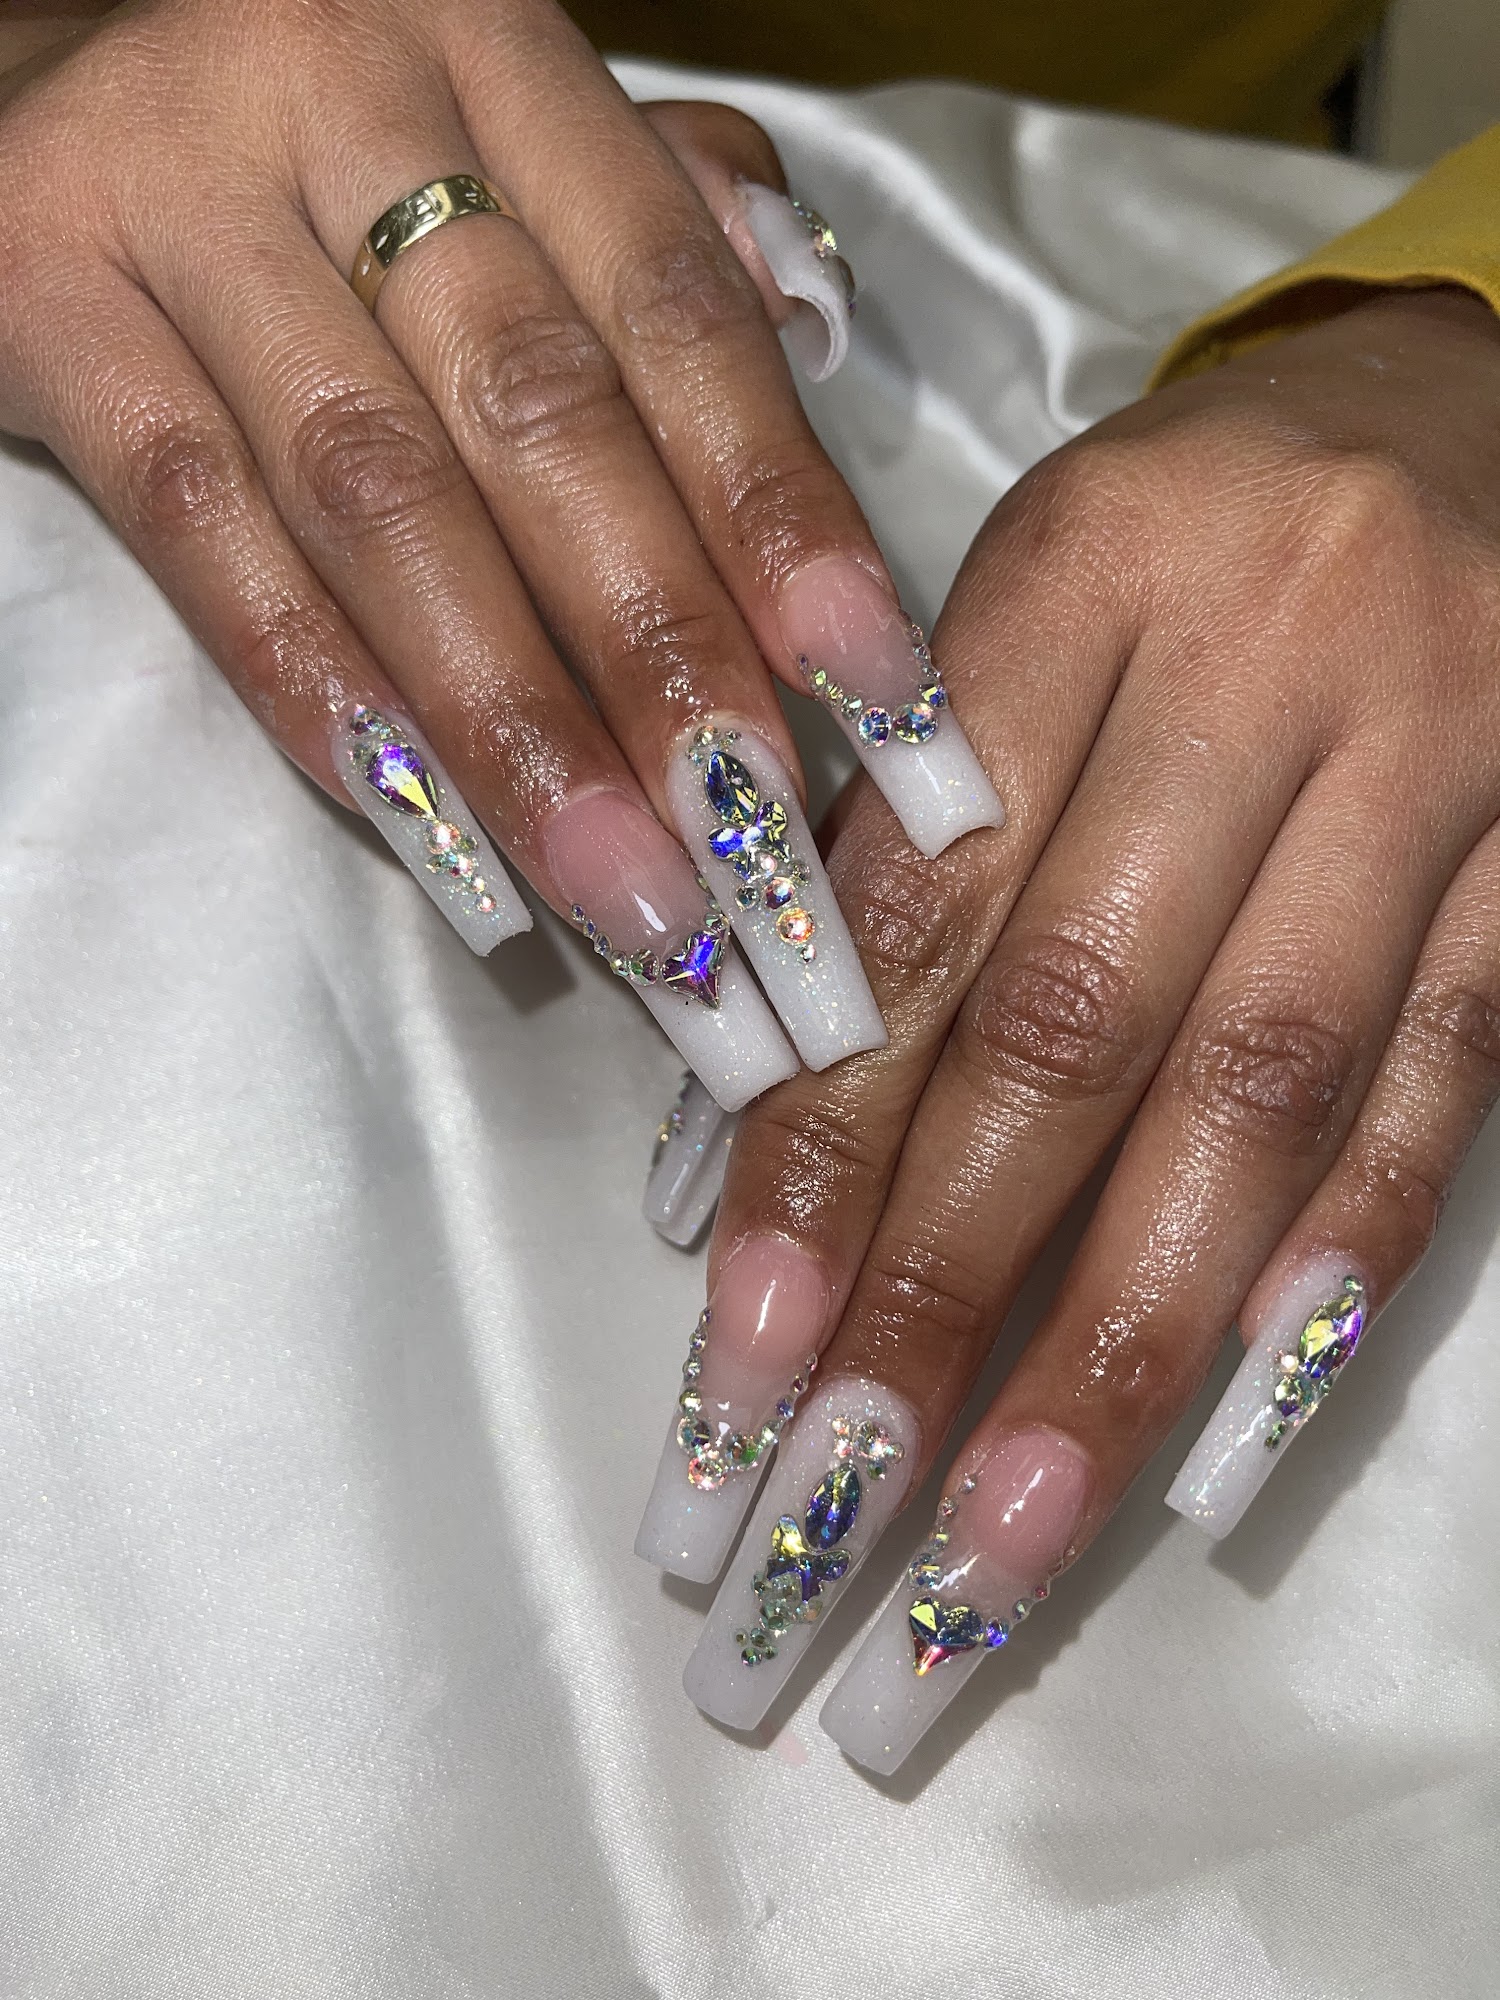 Nail Laplace 1036 W Airline Hwy Ste 114, Laplace Louisiana 70068